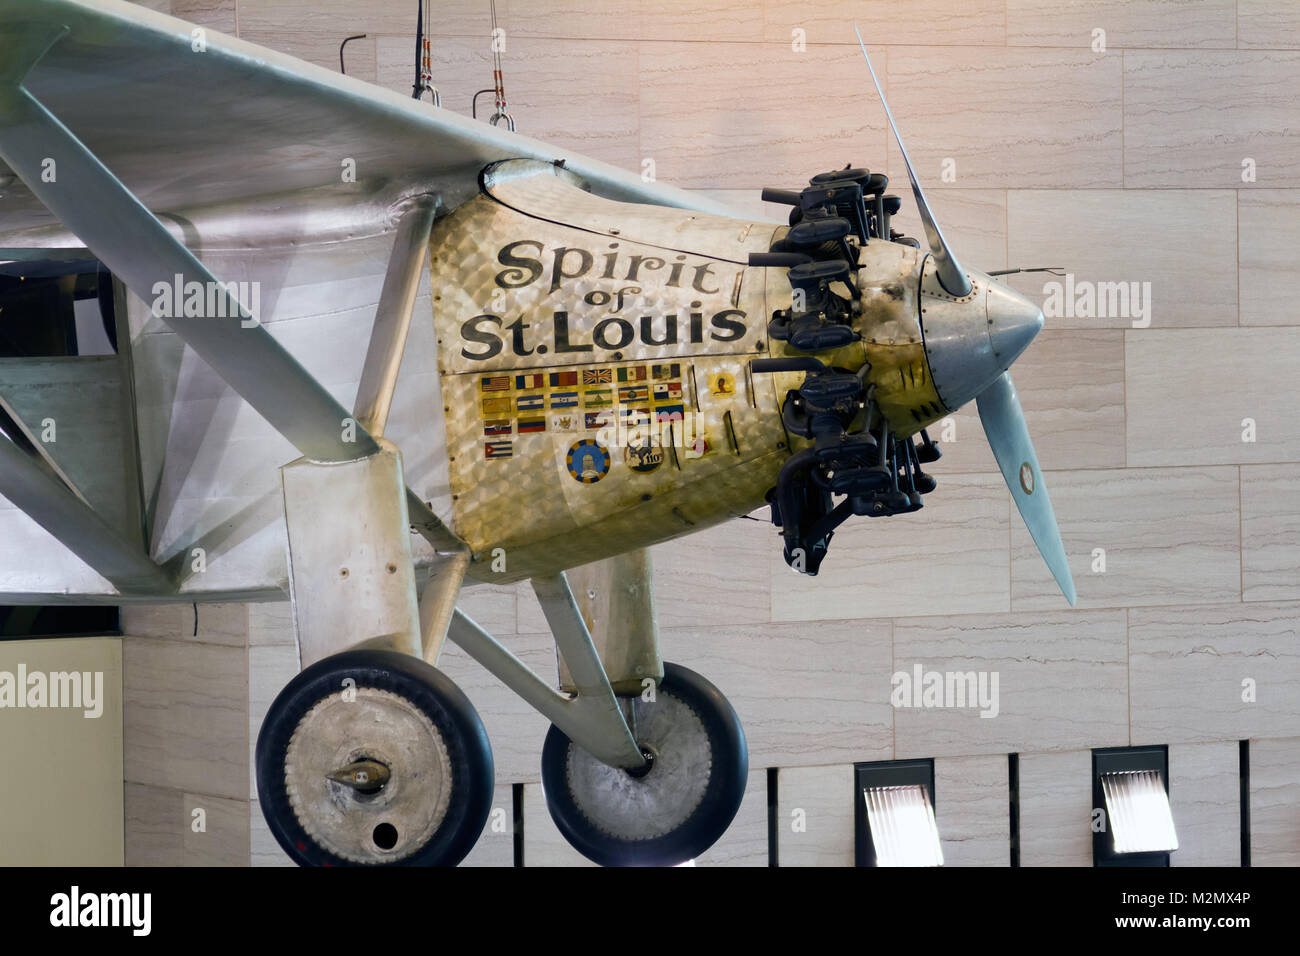 WASHINGTON D.C., USA - MAY 11, 2016: Spirit of St Louis aircraft, Charles Lindbergh,Smithsonian National Air and Space Museum in Washington D.C. Smith Stock Photo